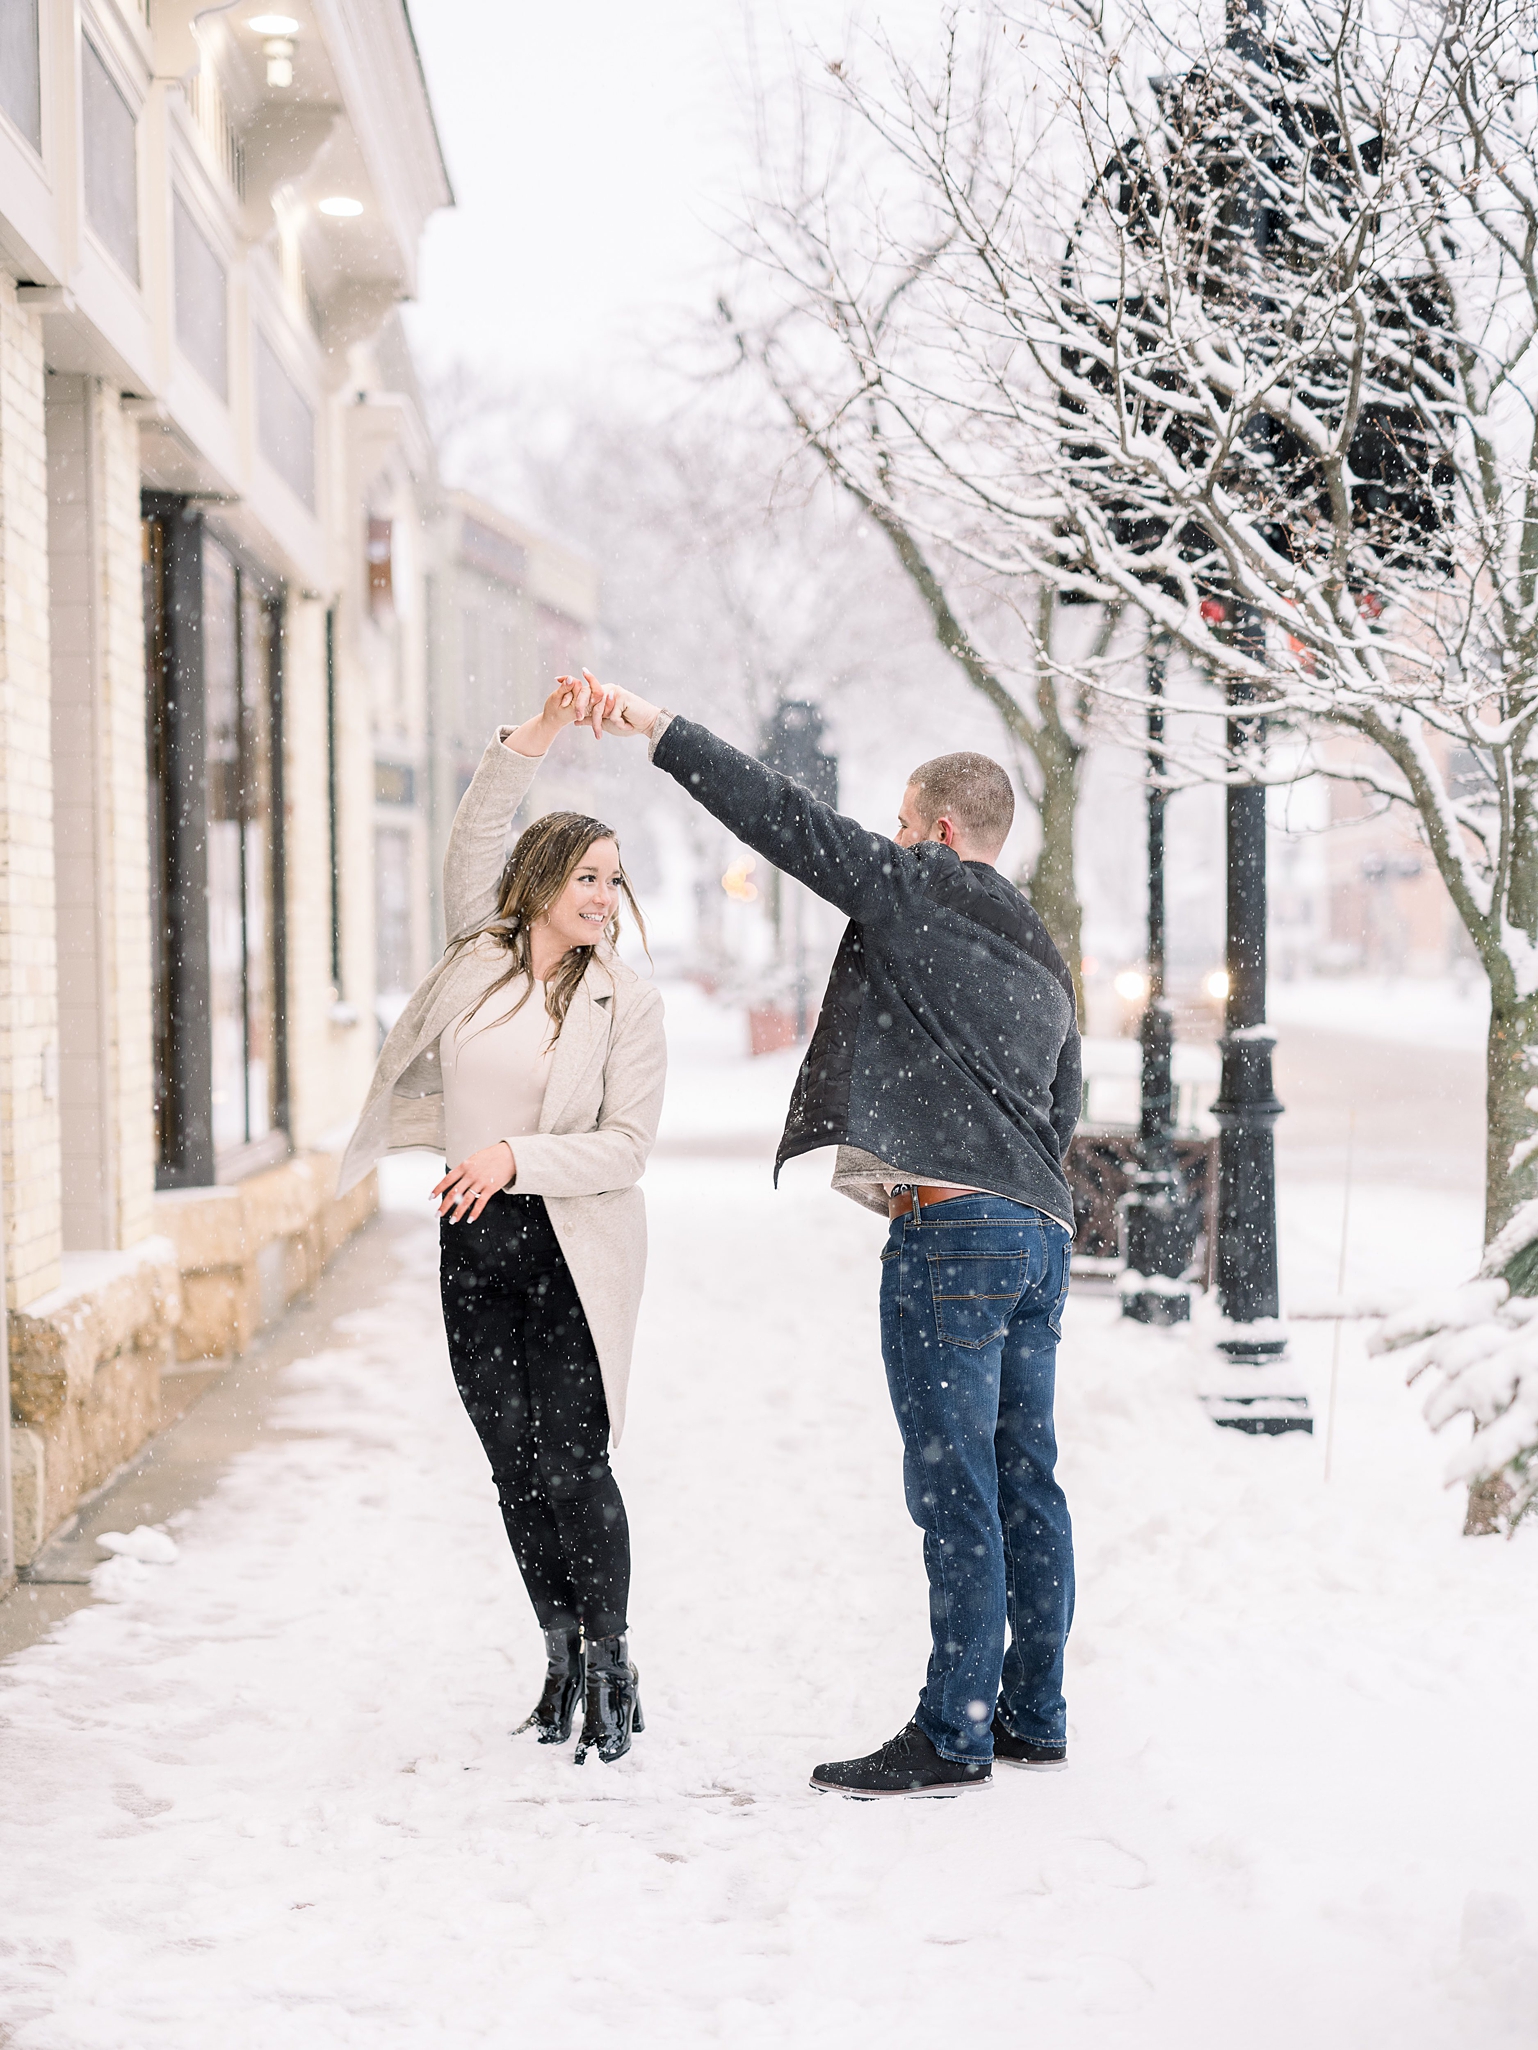 Downtown Middleton, WI Winter Engagement Session